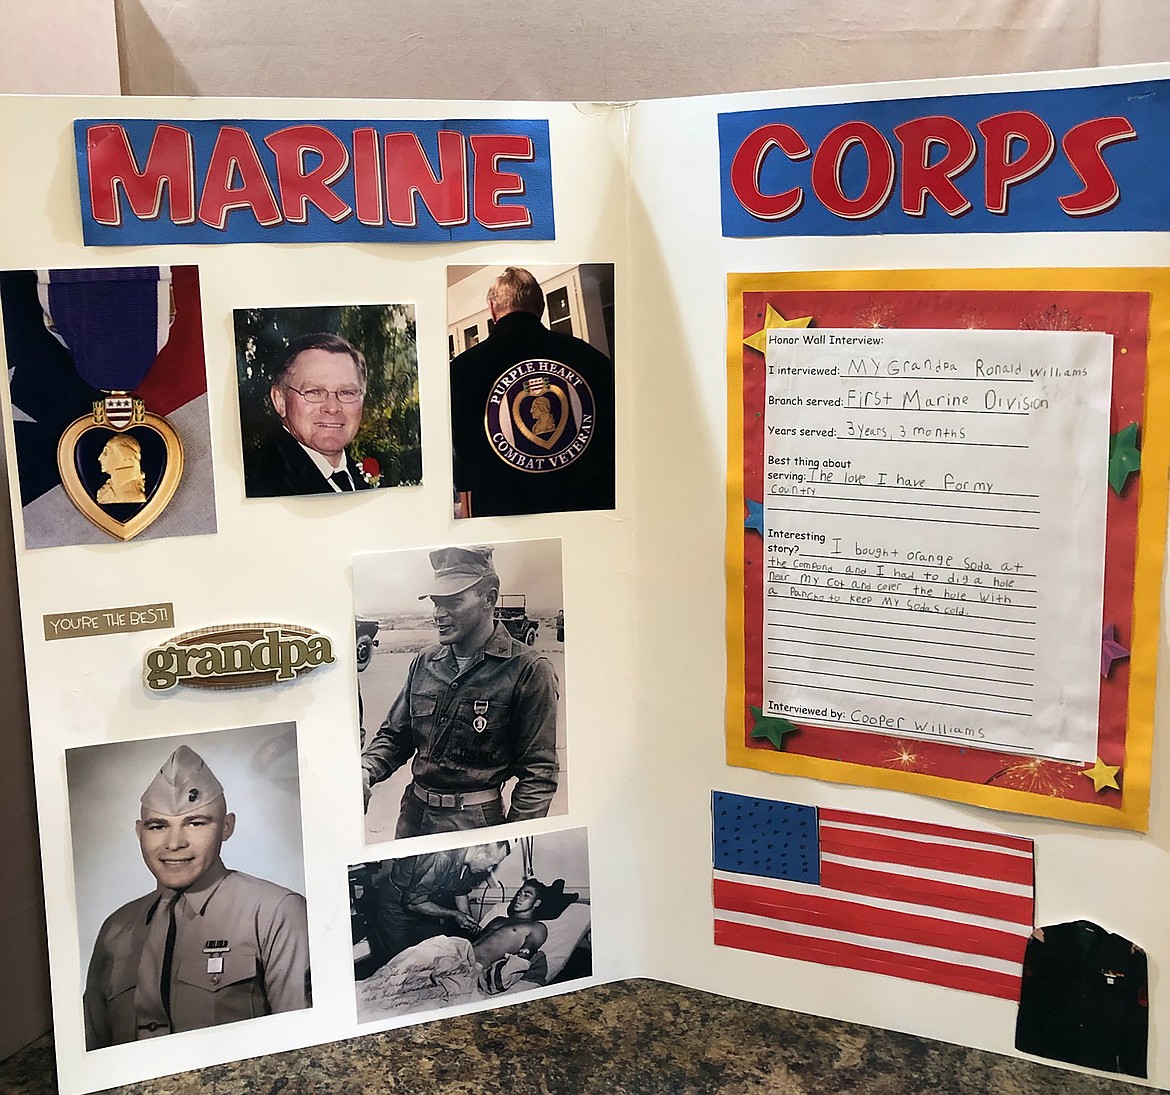 A display board created by Ronald Williams' grandson, Cooper Williams, tells of the details of his service and shows several photos from his service as well as recent photos of the Marine.